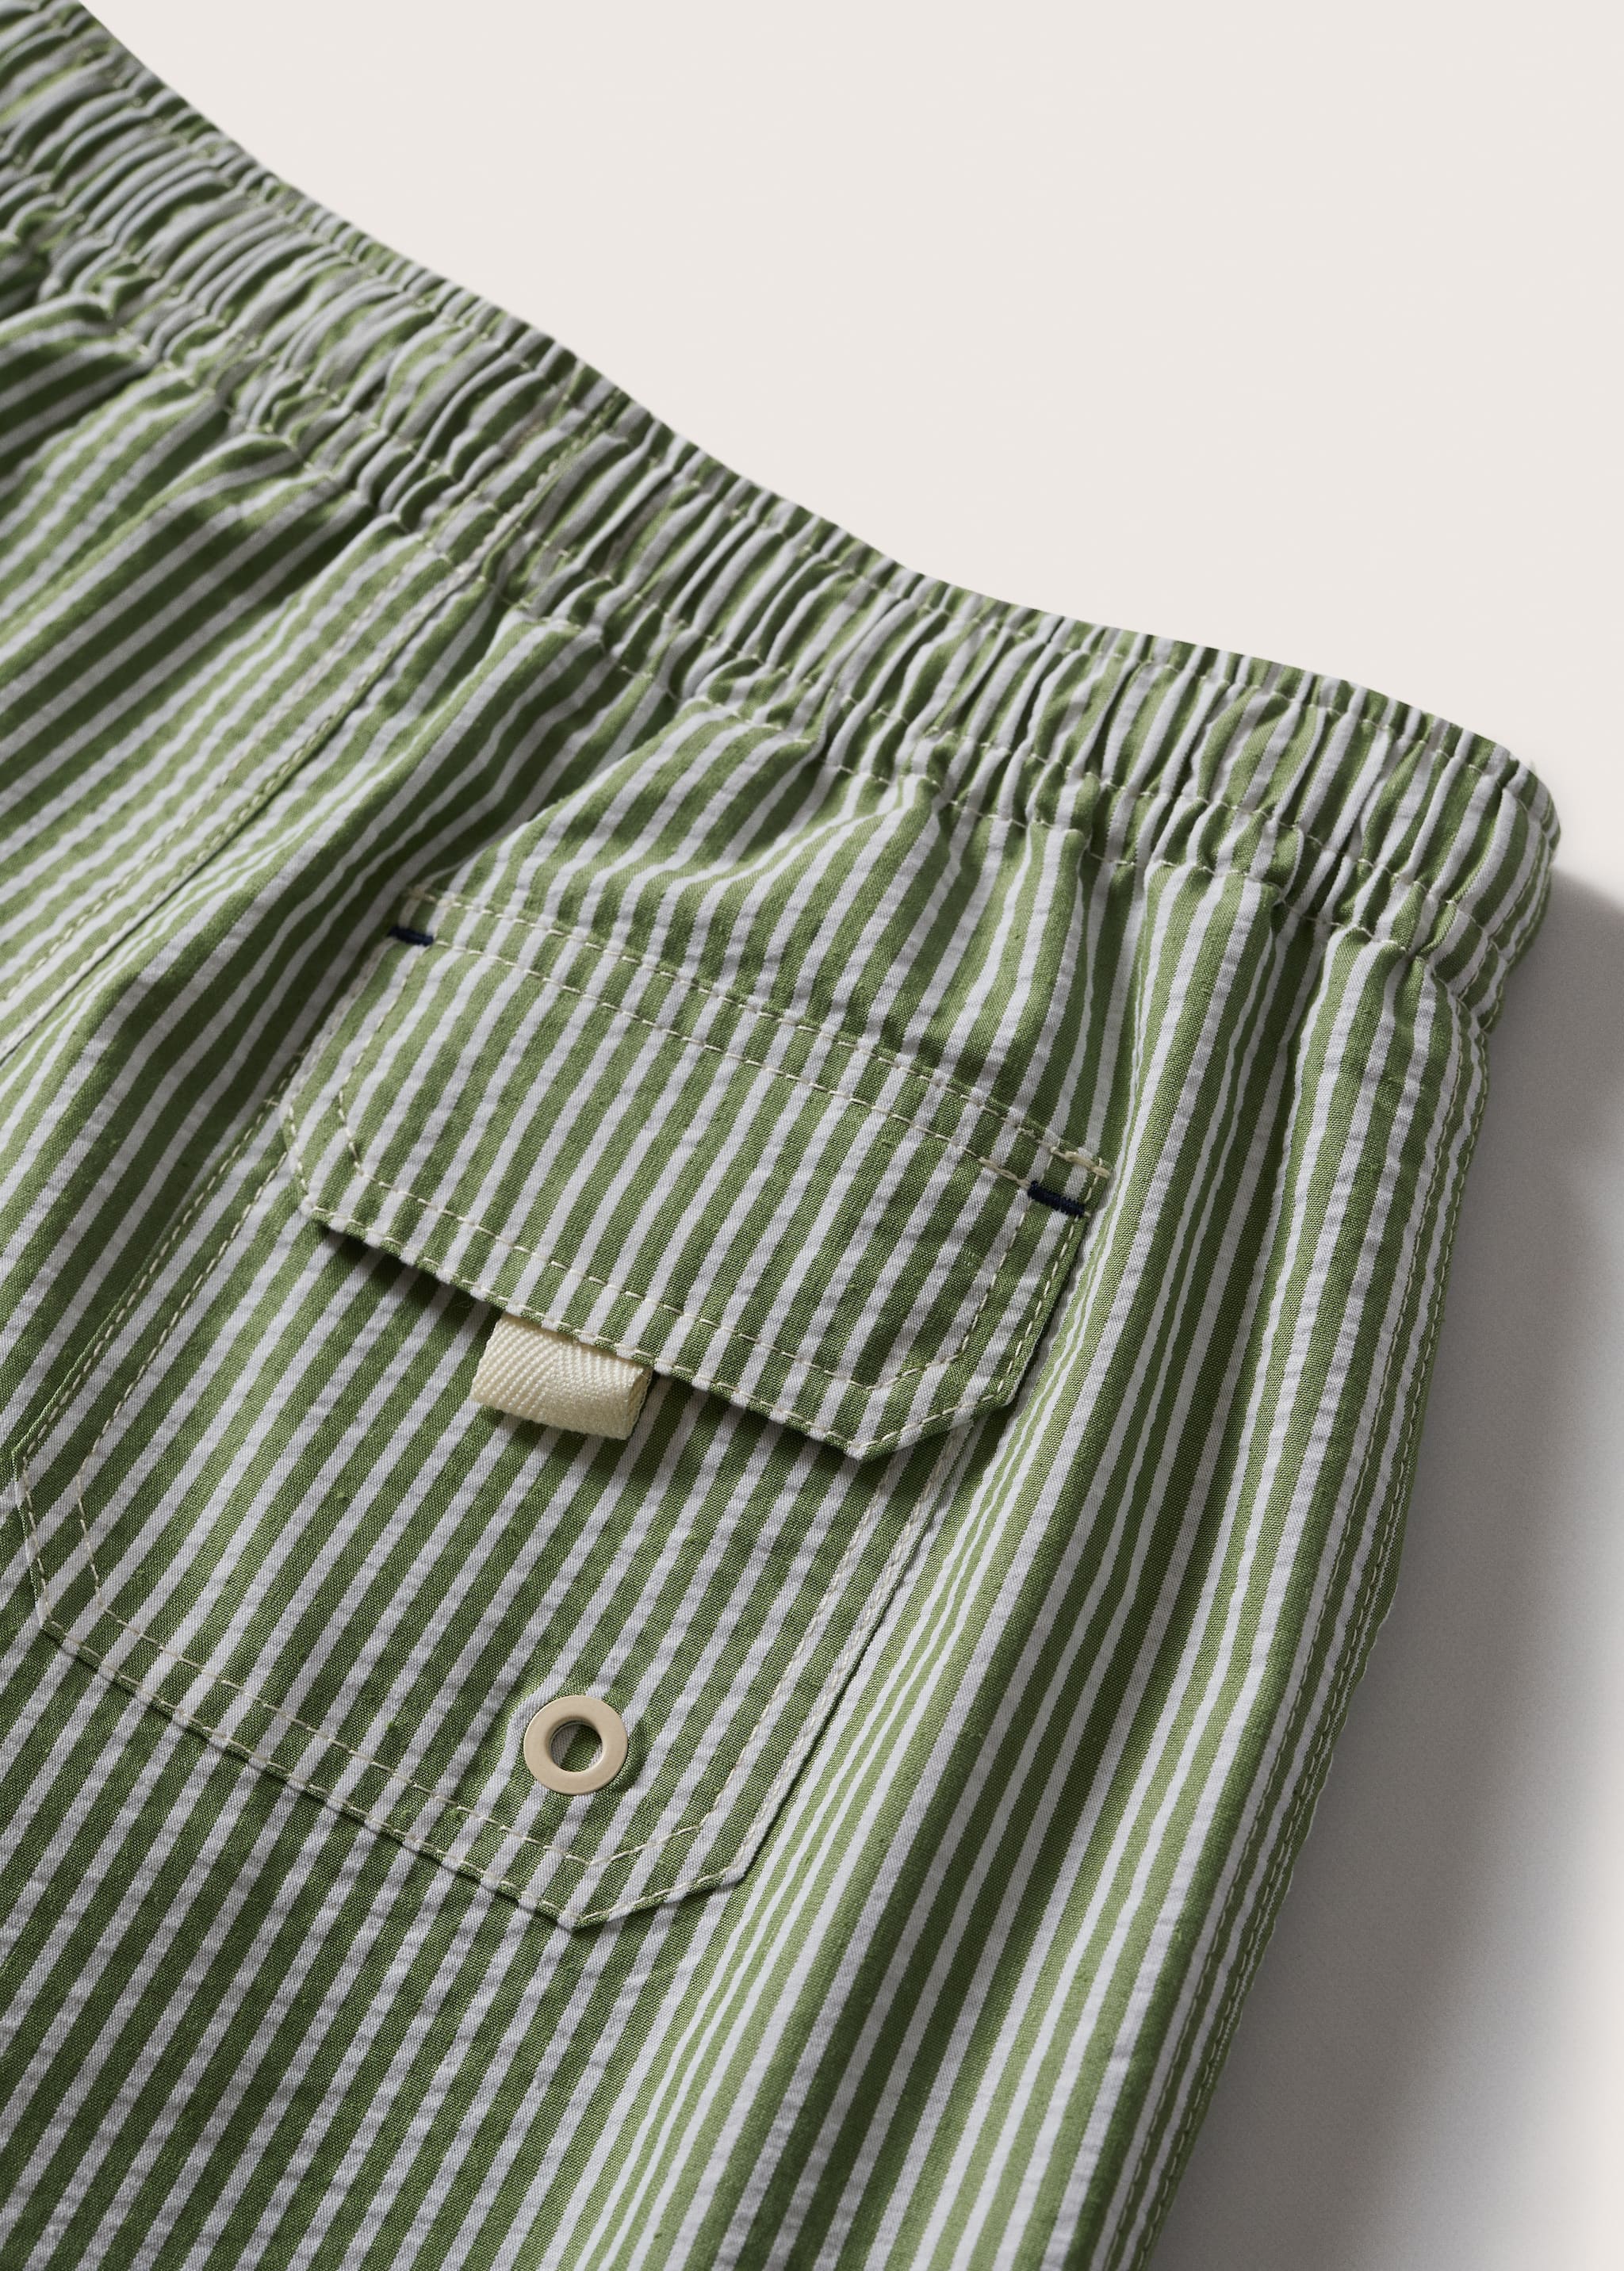 Striped swimming trunks - Details of the article 8